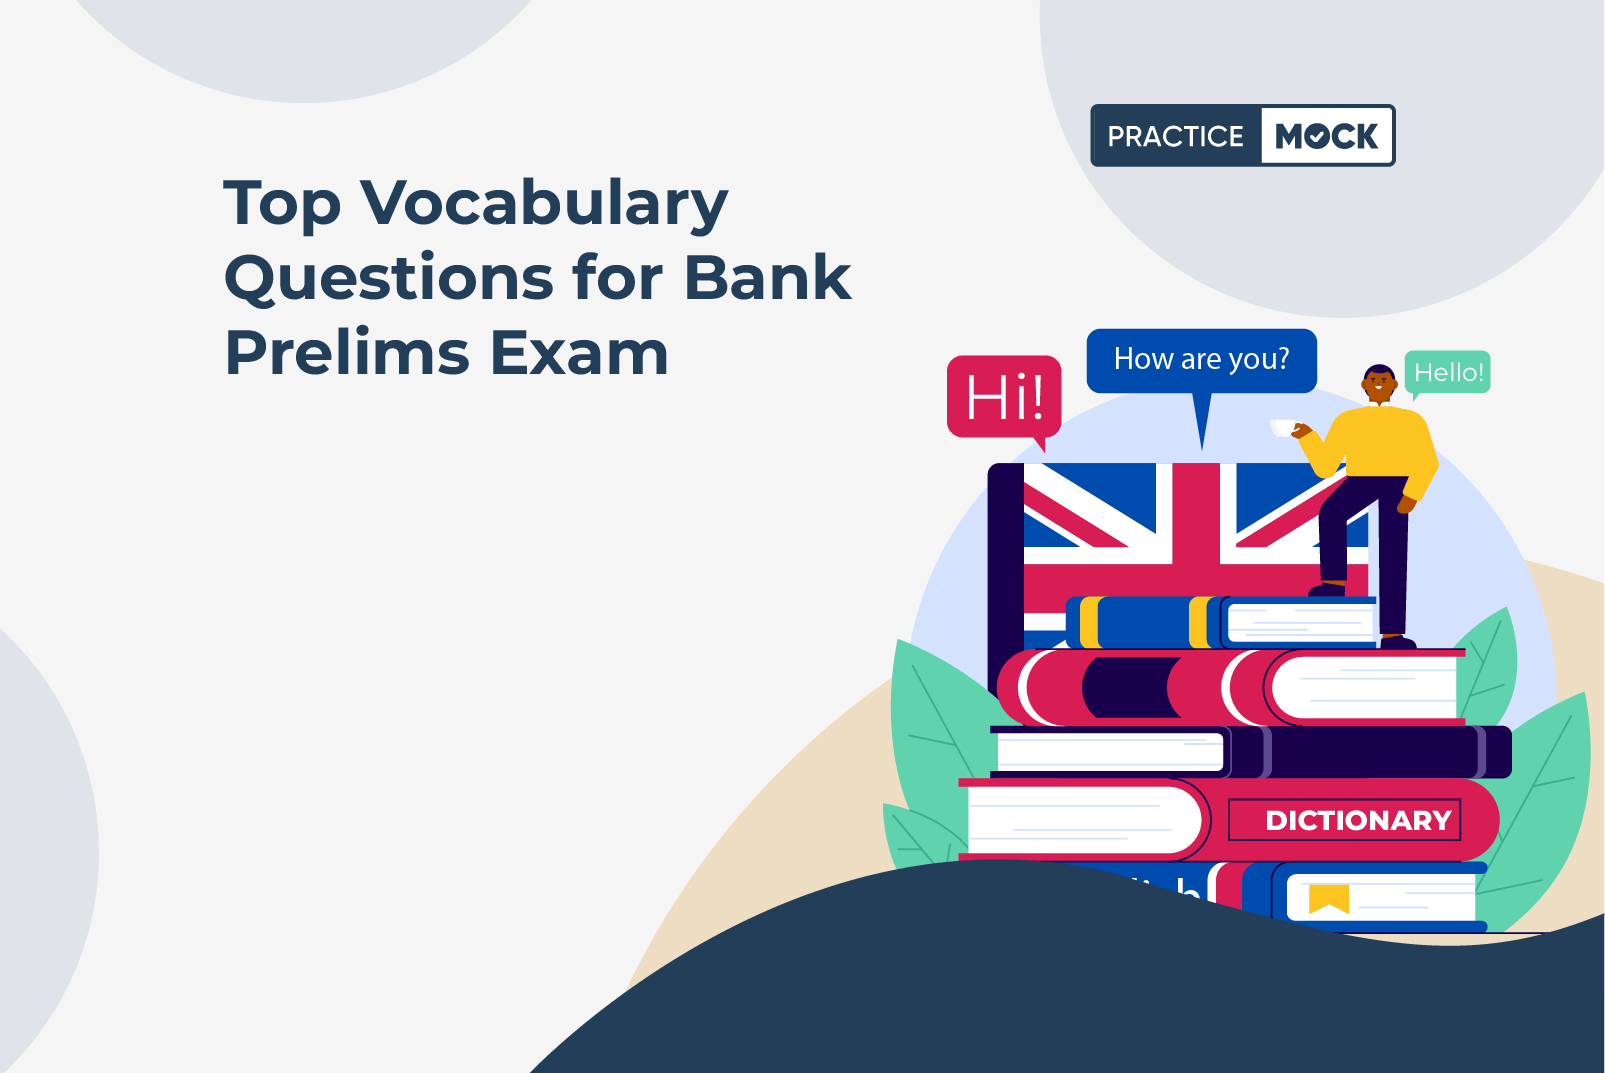 Top Vocabulary Questions for Bank Prelims Exam